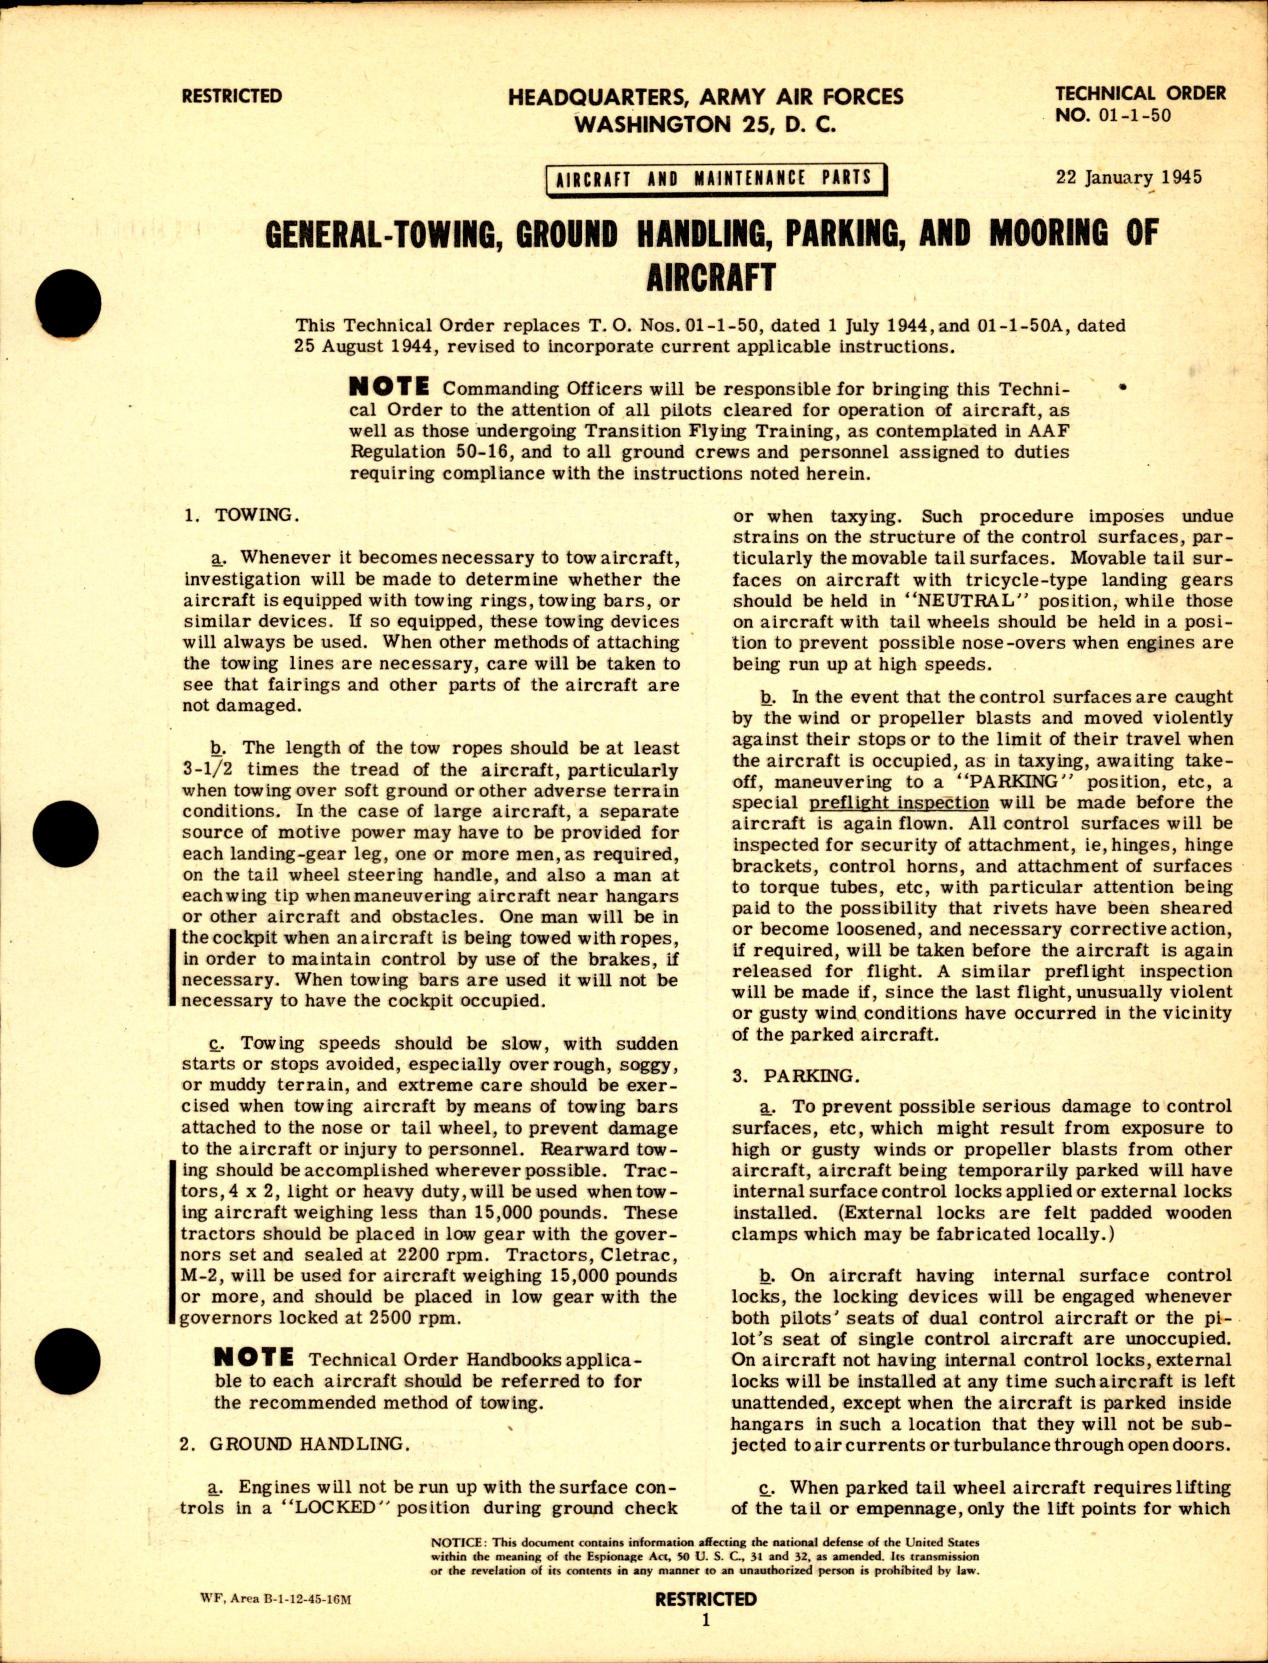 Sample page 1 from AirCorps Library document: Aircraft and Maintenance Parts for General-Towing, Ground Handling, Parking, and Mooring of Aircraft